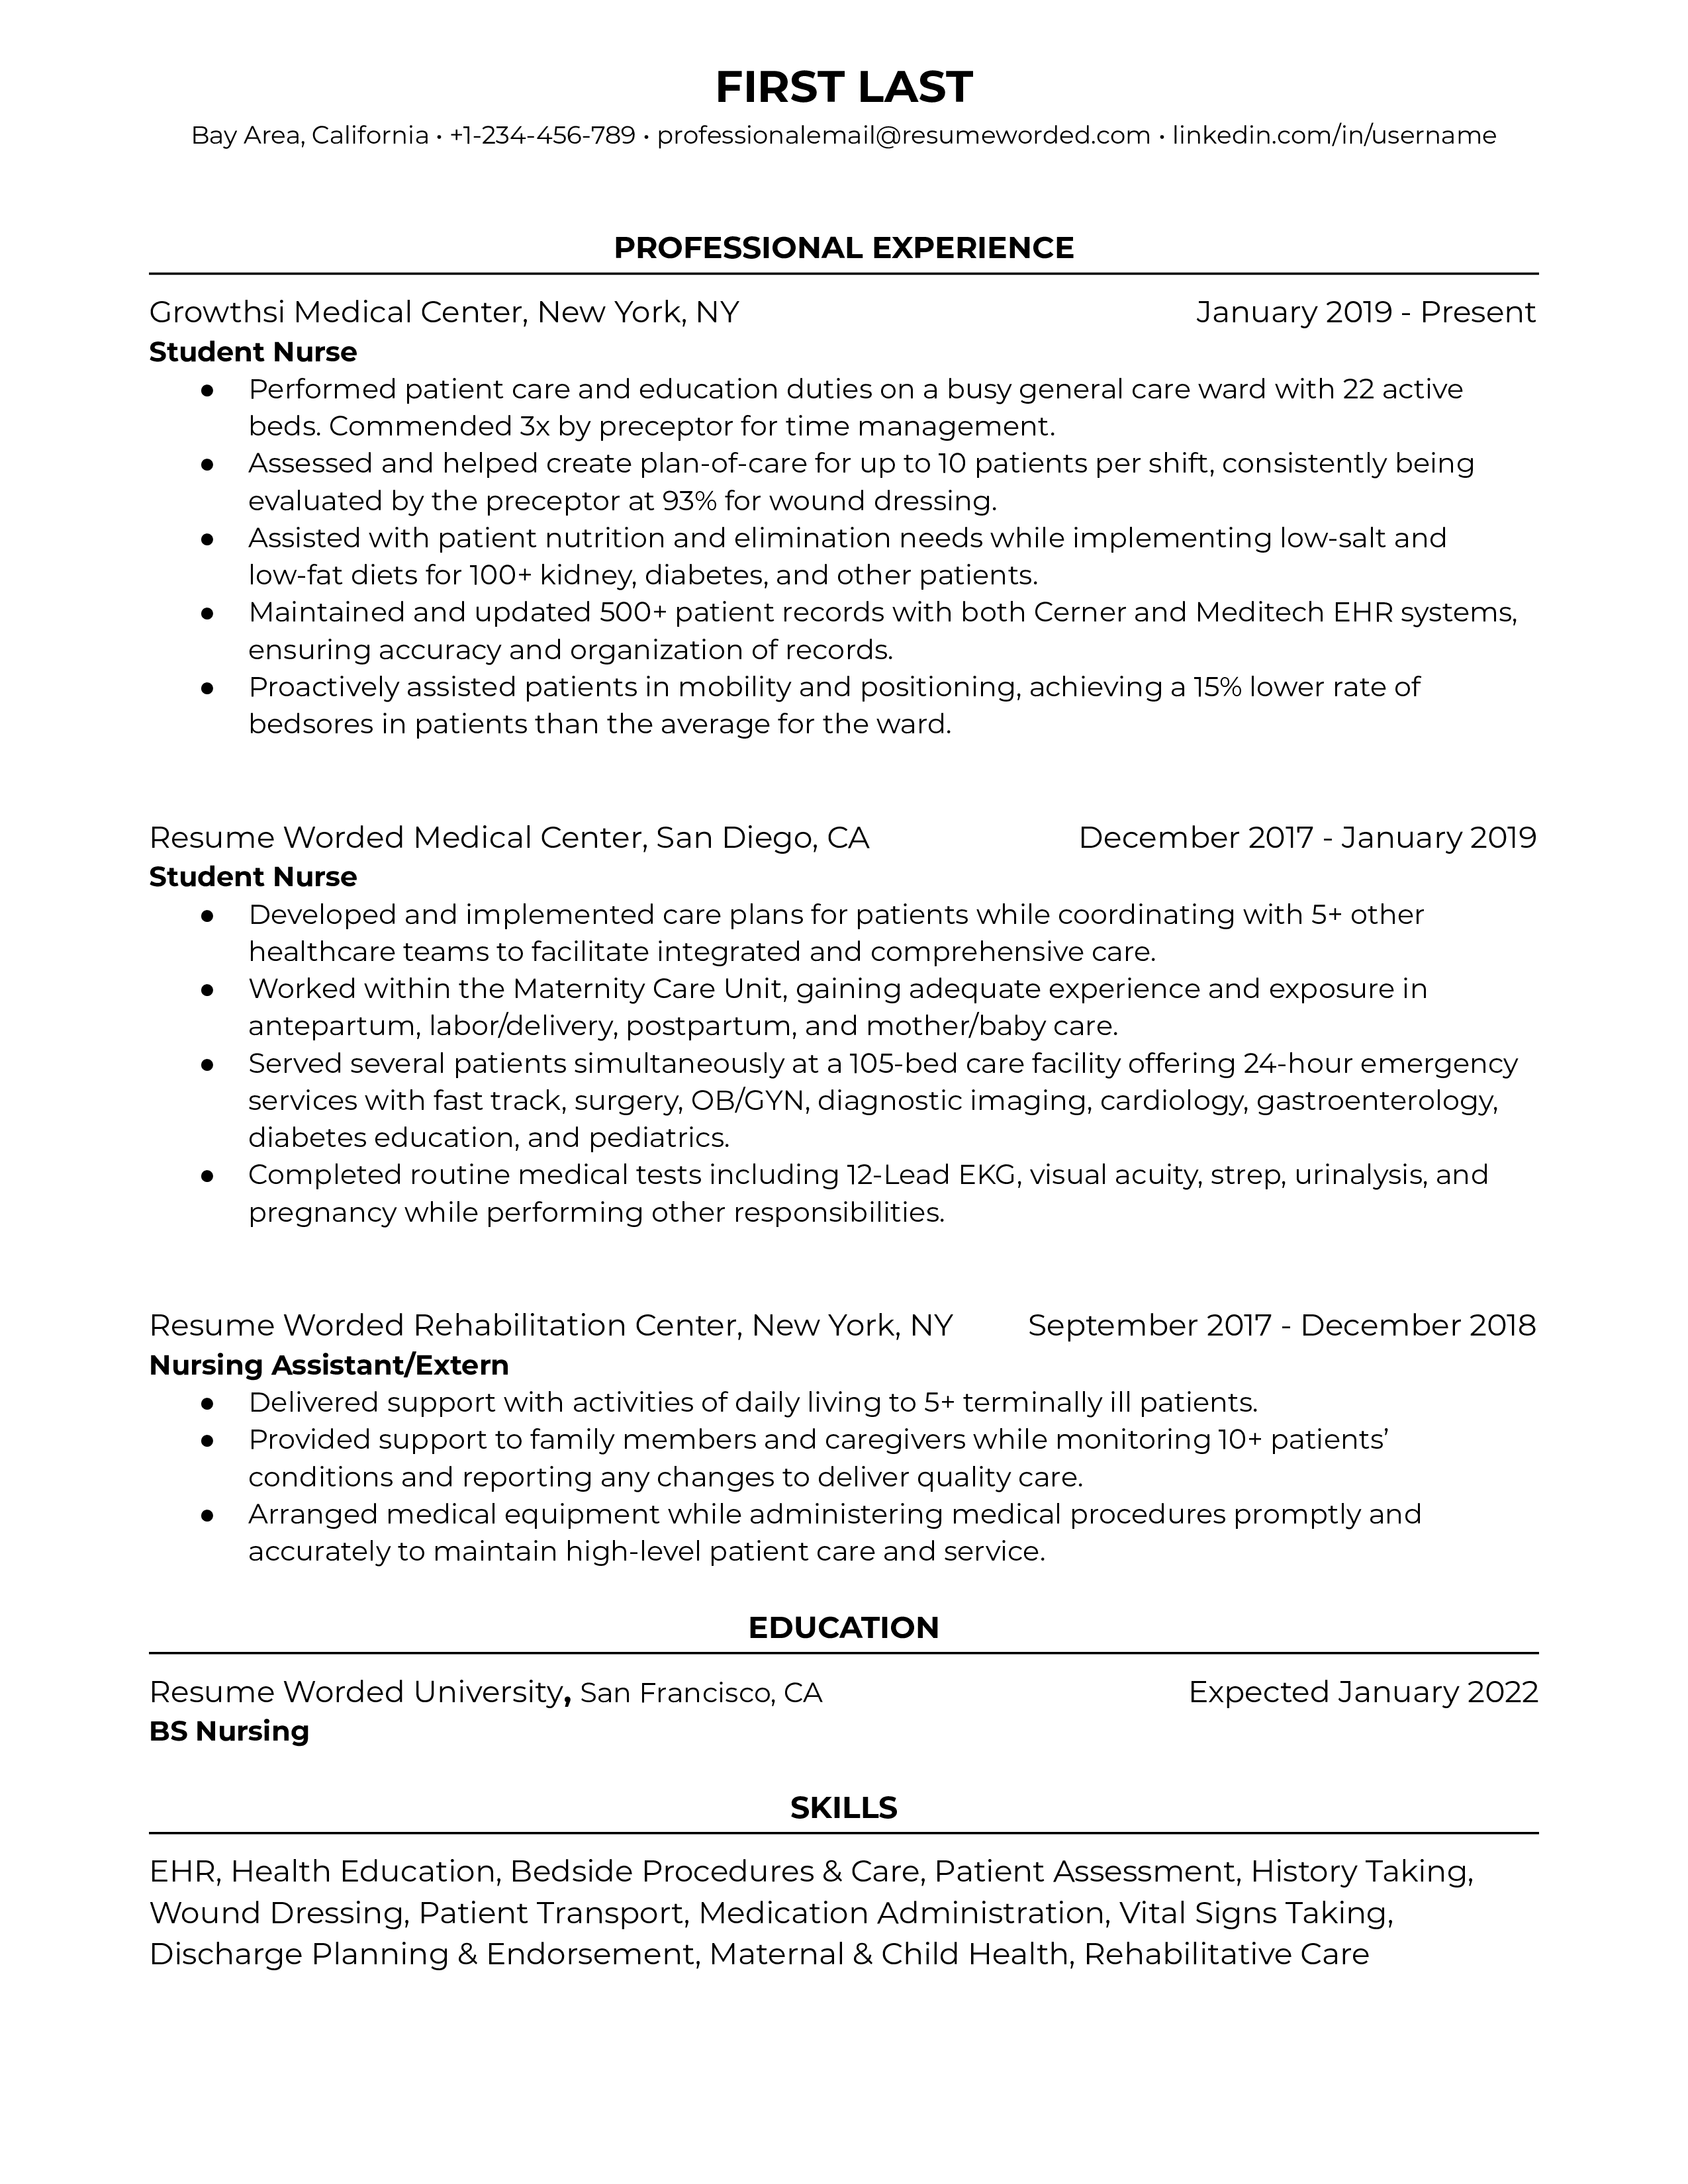 A detailed and well-structured CV for a Nursing Student role.